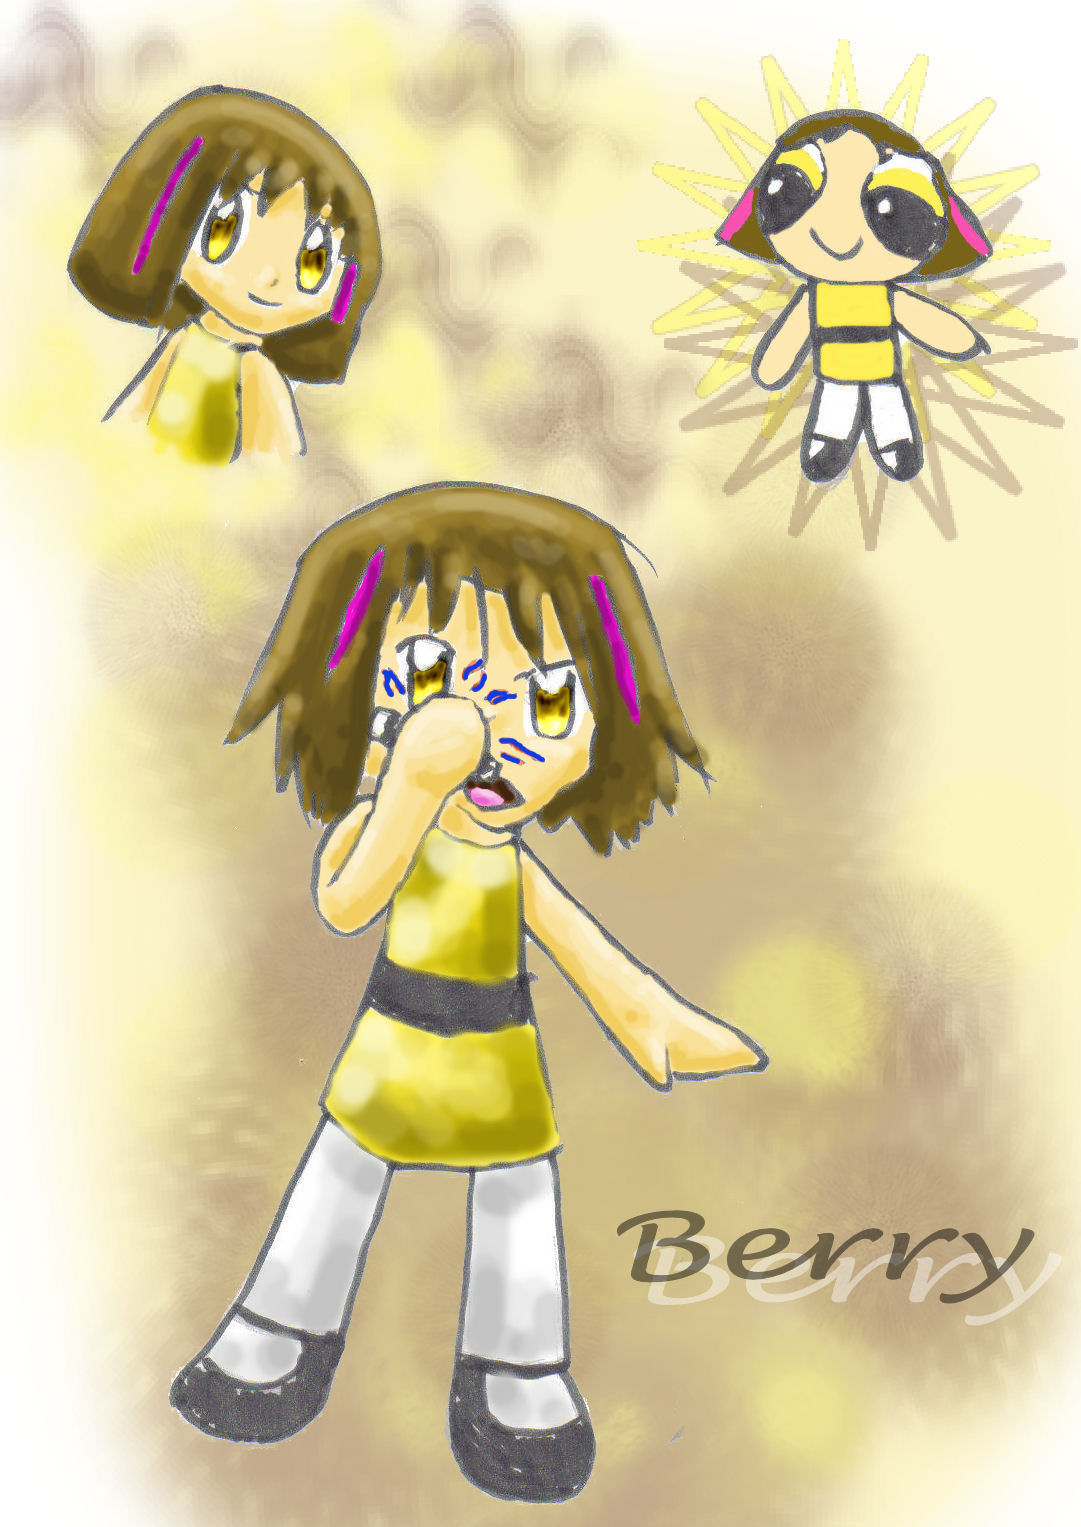 Berry by rufus008